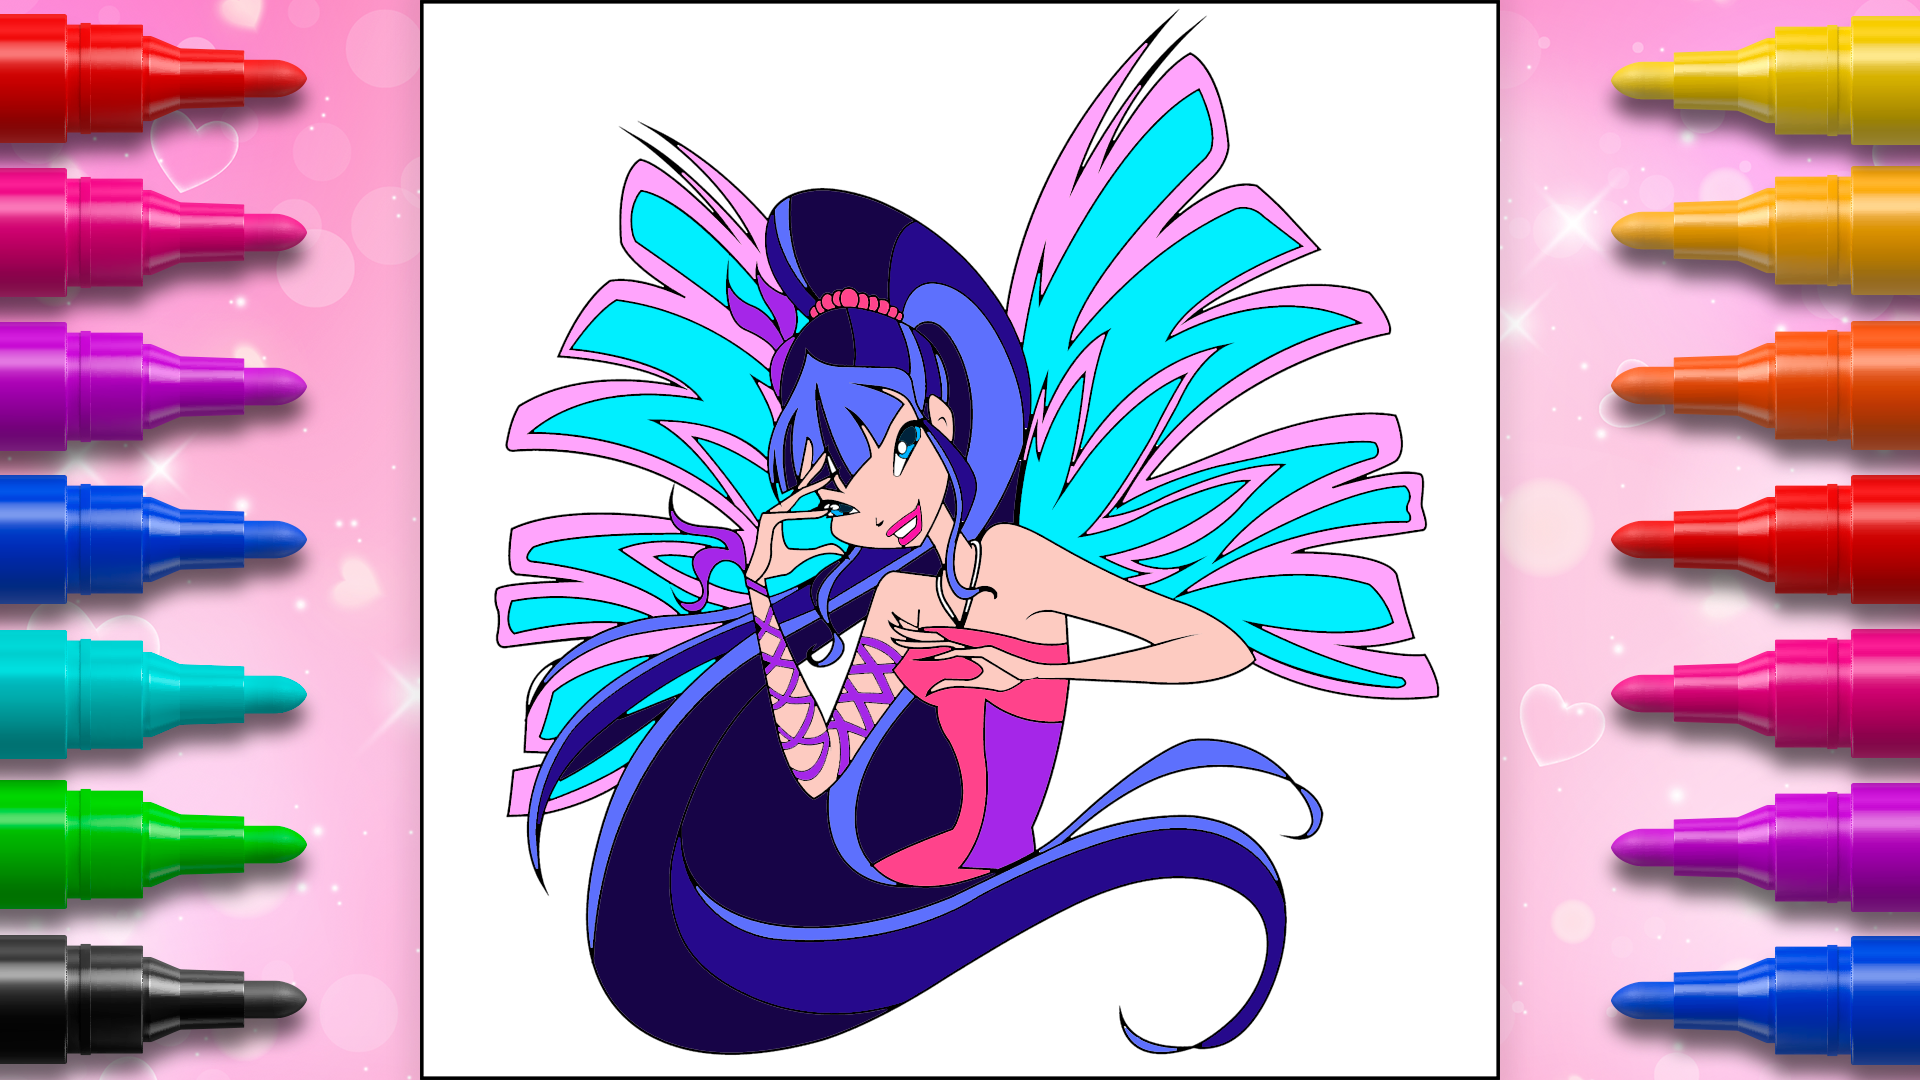 winx club musa sirenix coloring pages